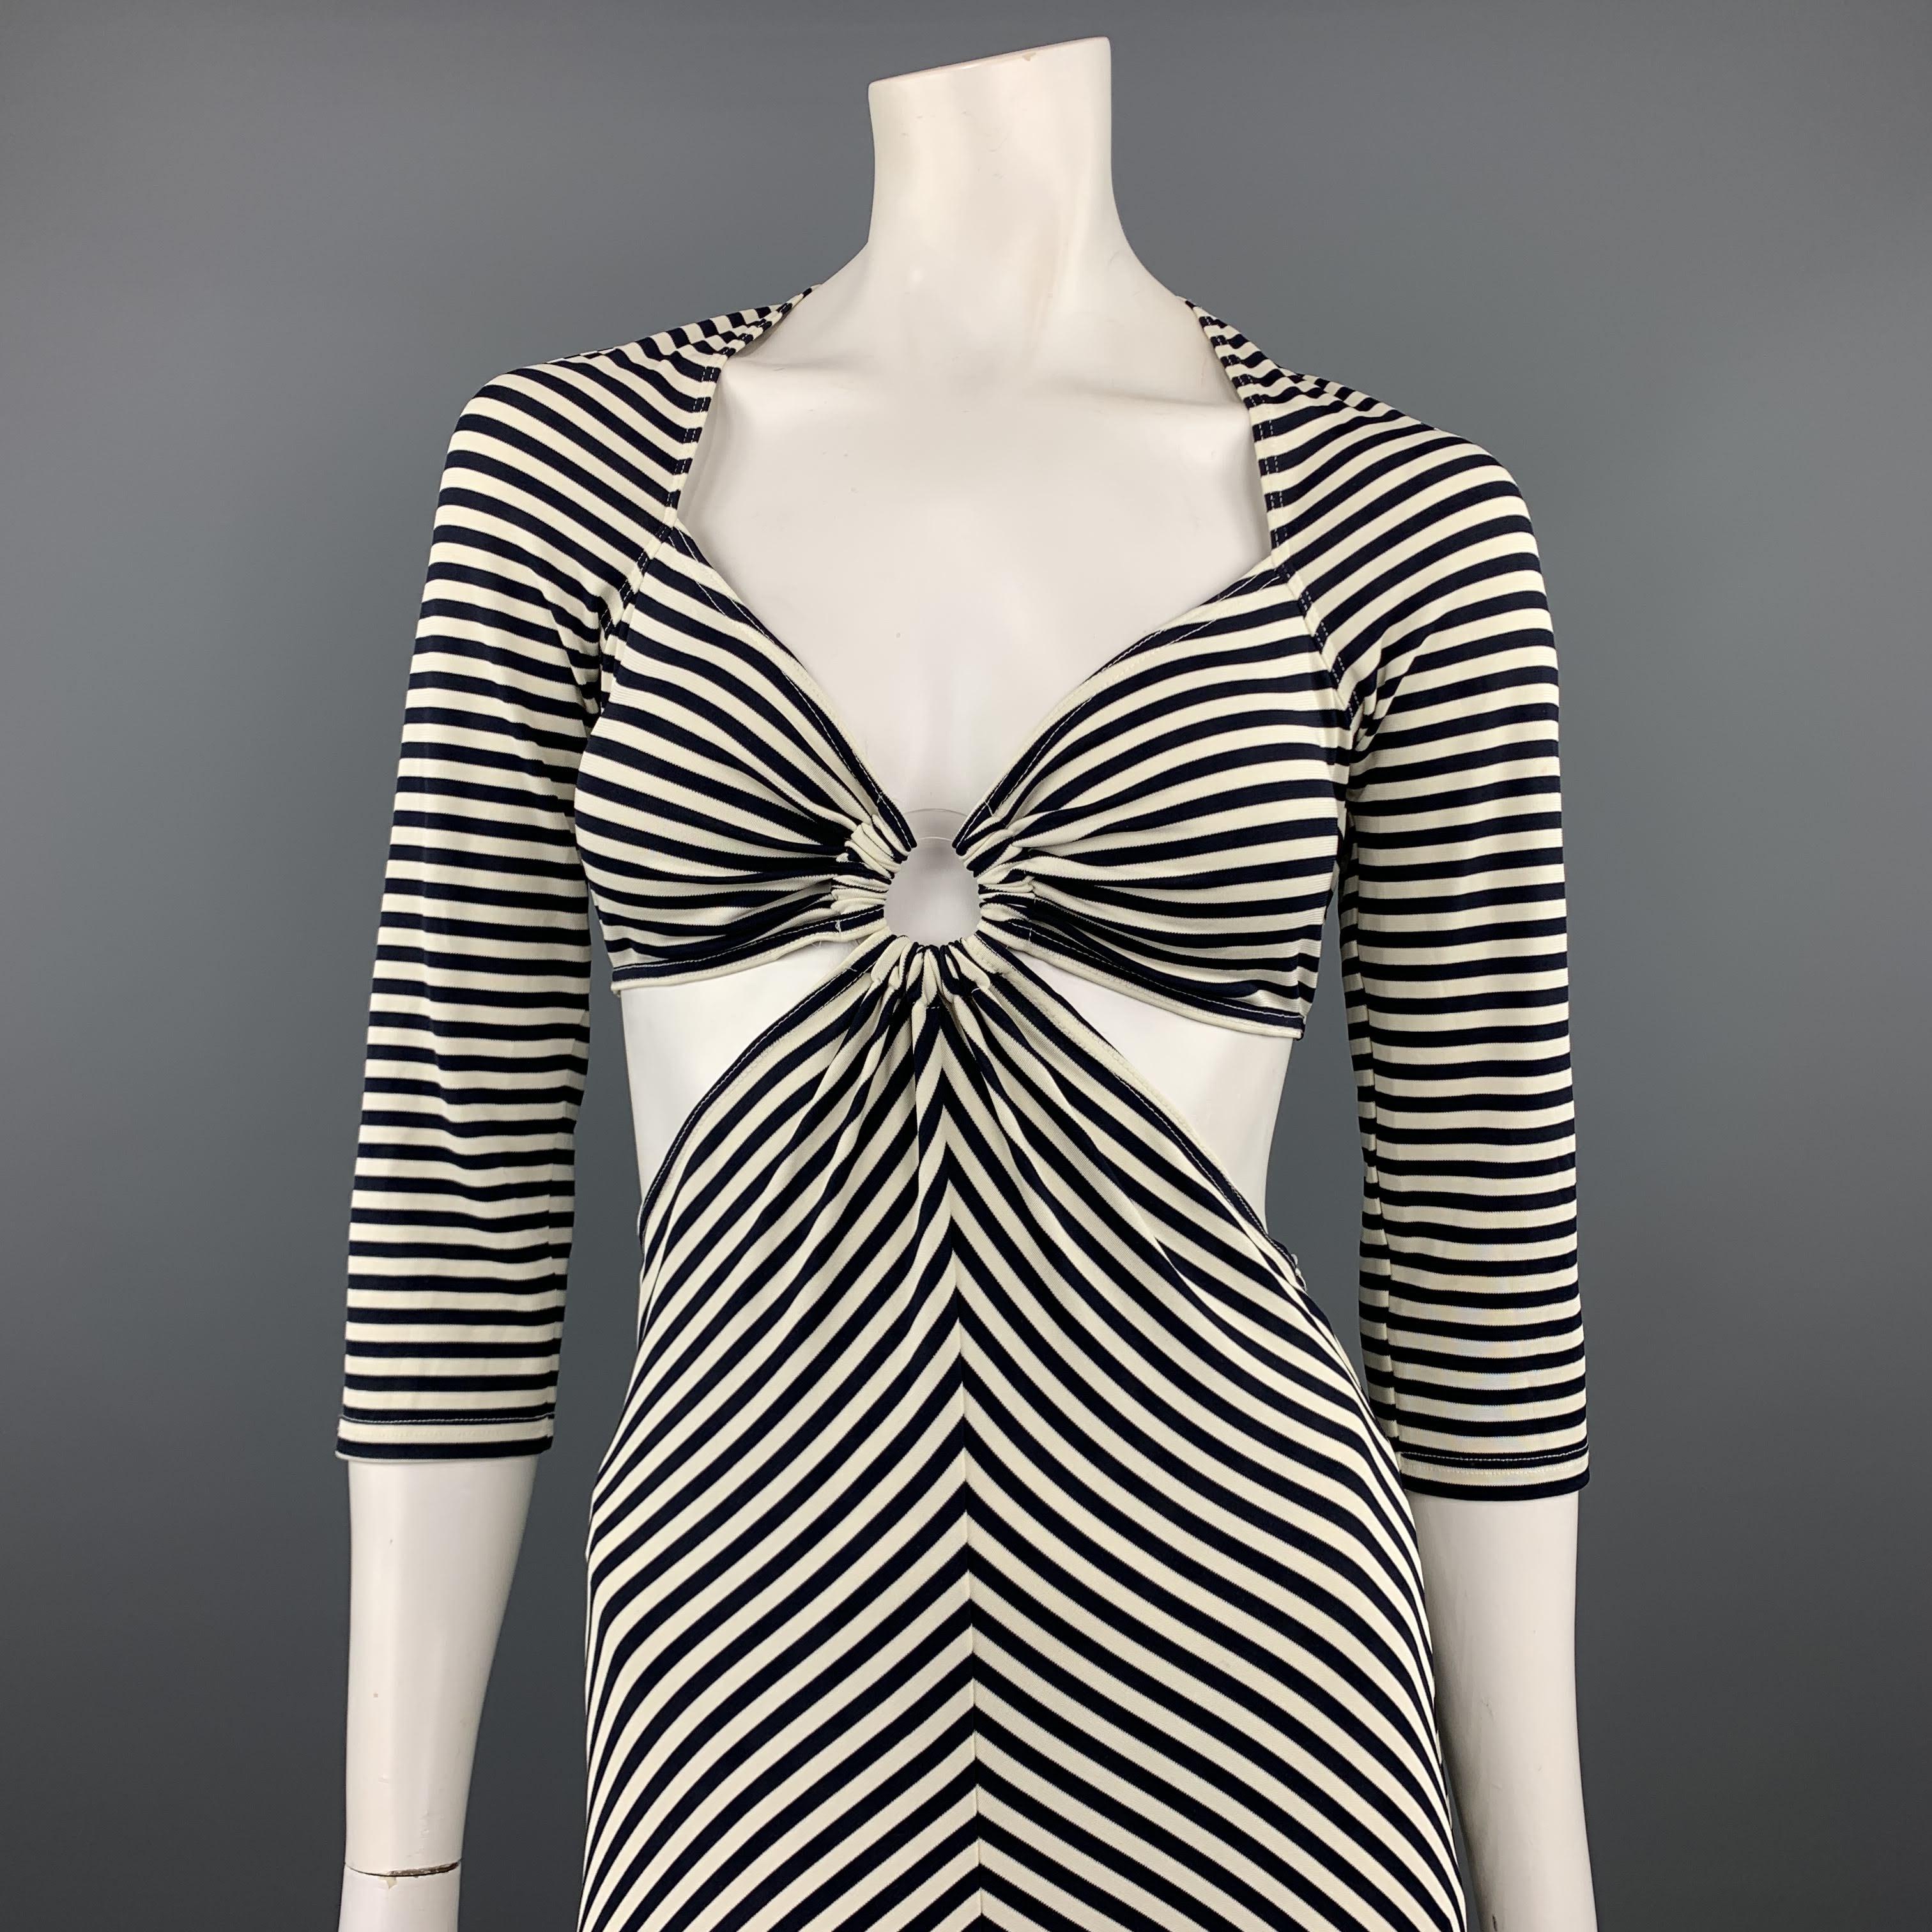 MICHAEL KORS dress comes in navy and white striped rayon jersey with a sweetheart bolero cut top and A line cutout skirt connected with clear bra hoop. Made in Italy.
 
Excellent Pre-Owned Condition.
Marked: 10
 
Measurements:
 
Shoulder: 15